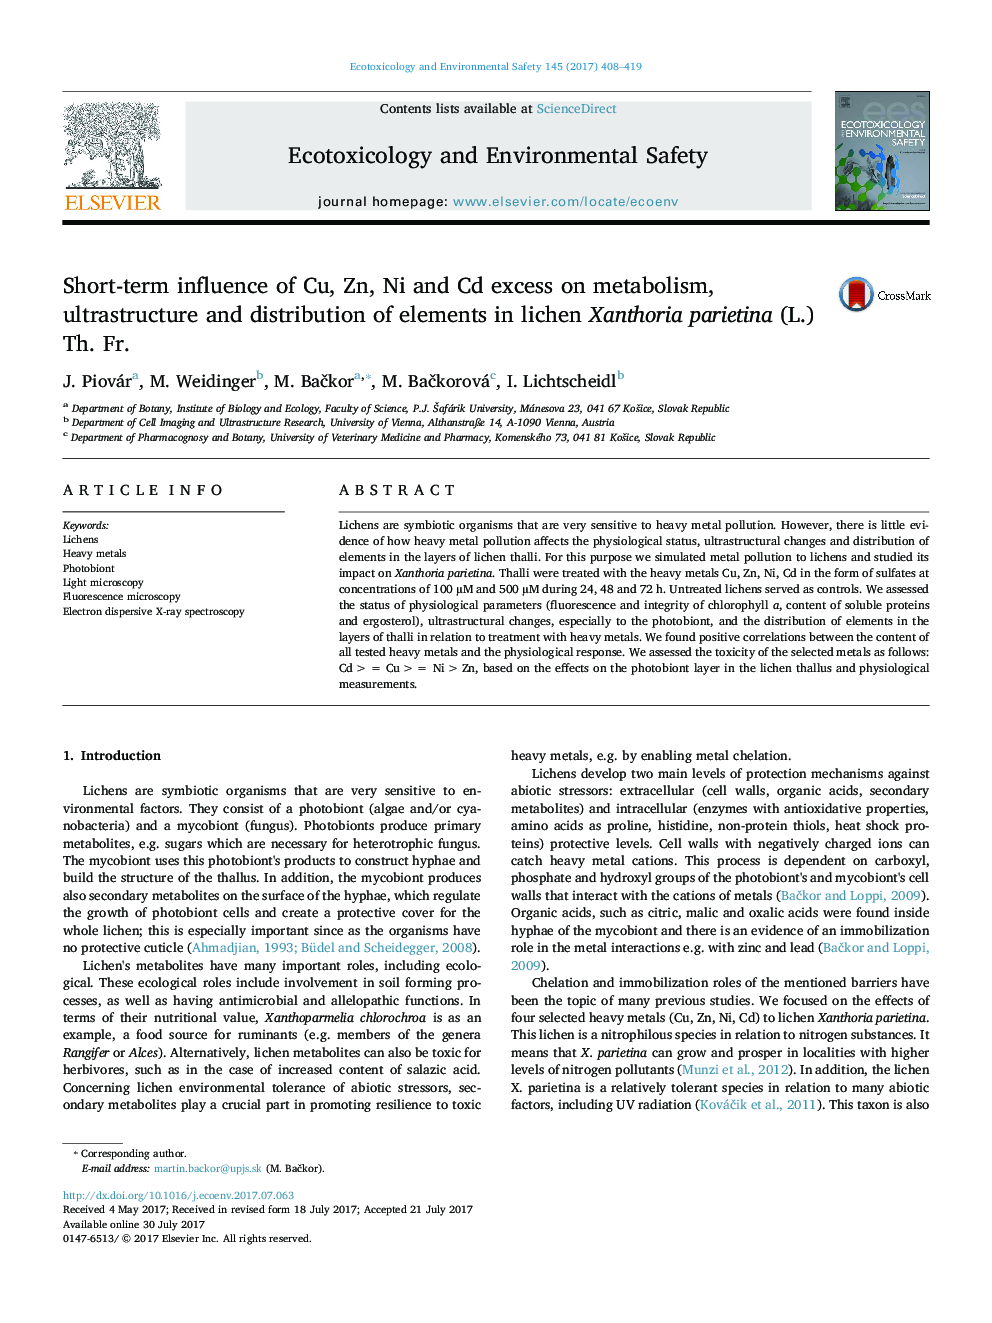 Short-term influence of Cu, Zn, Ni and Cd excess on metabolism, ultrastructure and distribution of elements in lichen Xanthoria parietina (L.) Th. Fr.